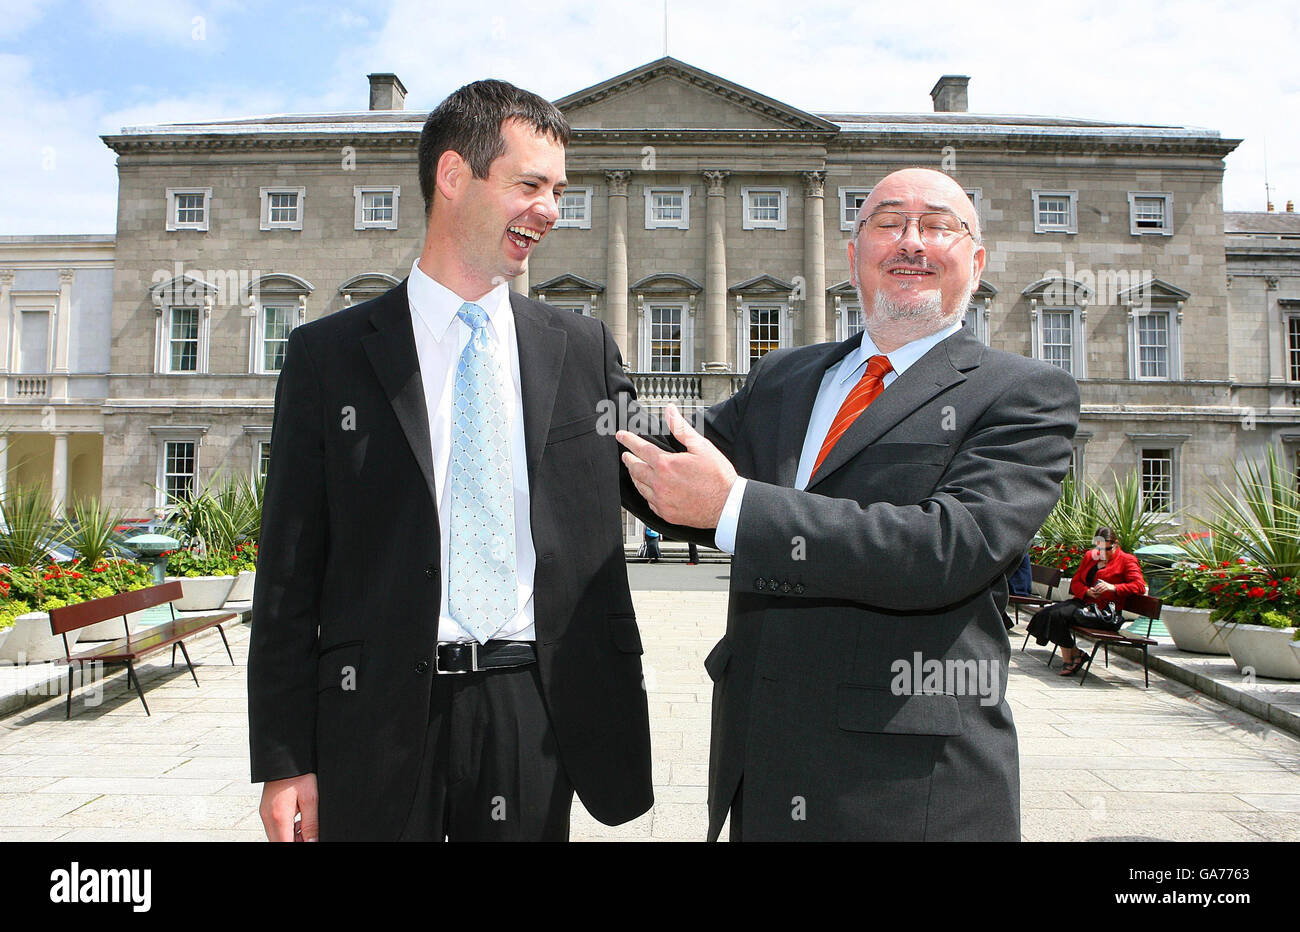 Pearse Doherty, Sinn Fein representative for Donegal SW, left, is congratulated on becoming a member of the Seanad Eireann by Caoimhghin O Caolain TD, outside Leinster House Dublin. Stock Photo